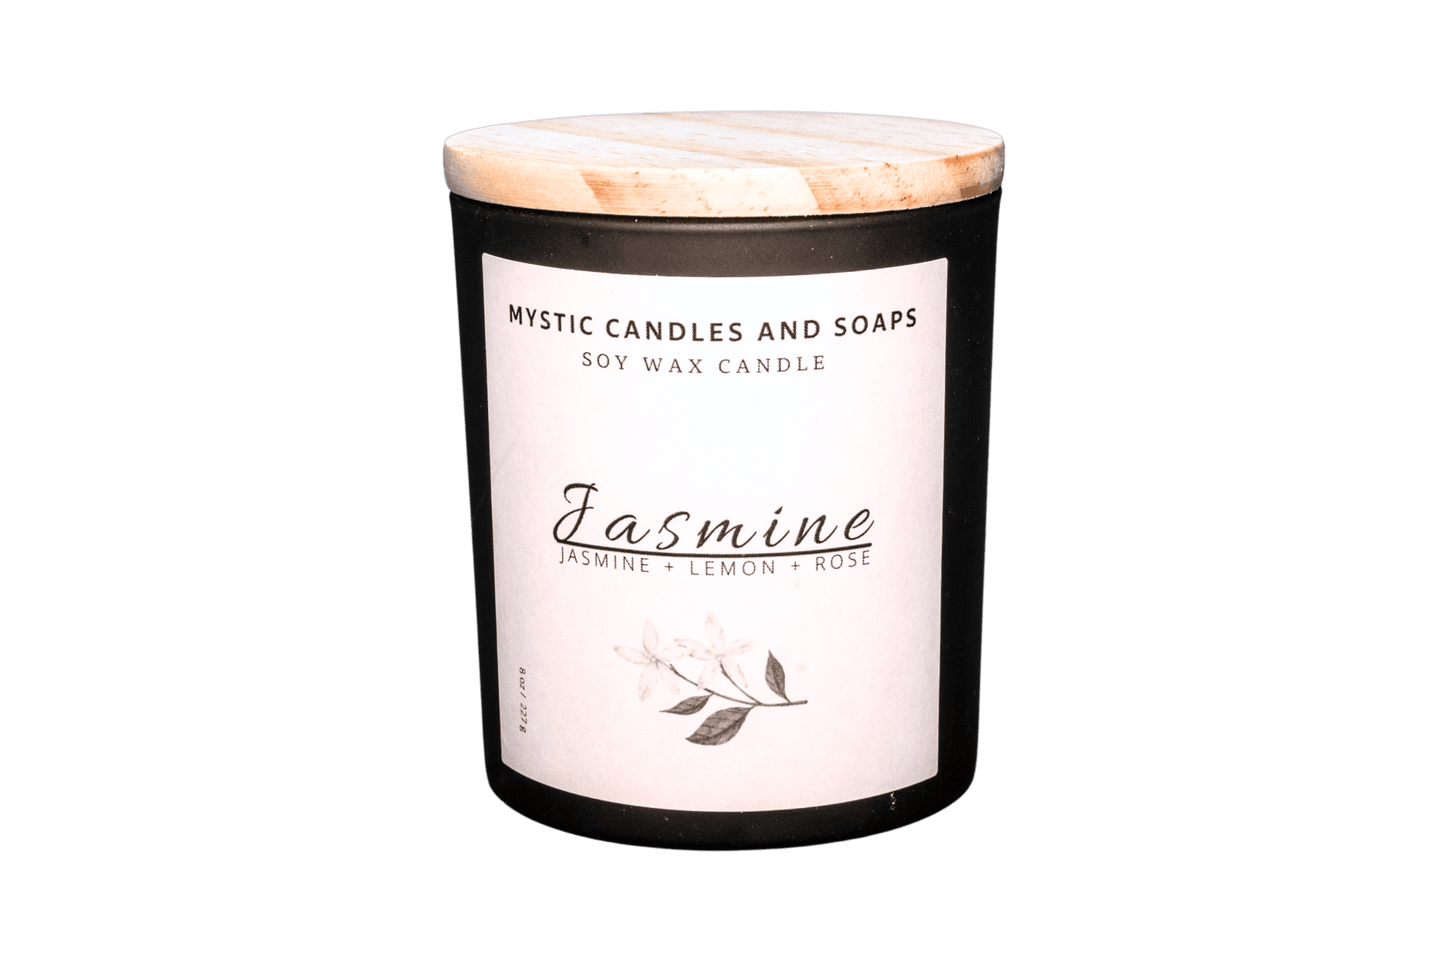 Jasmine Scented soy wax candle